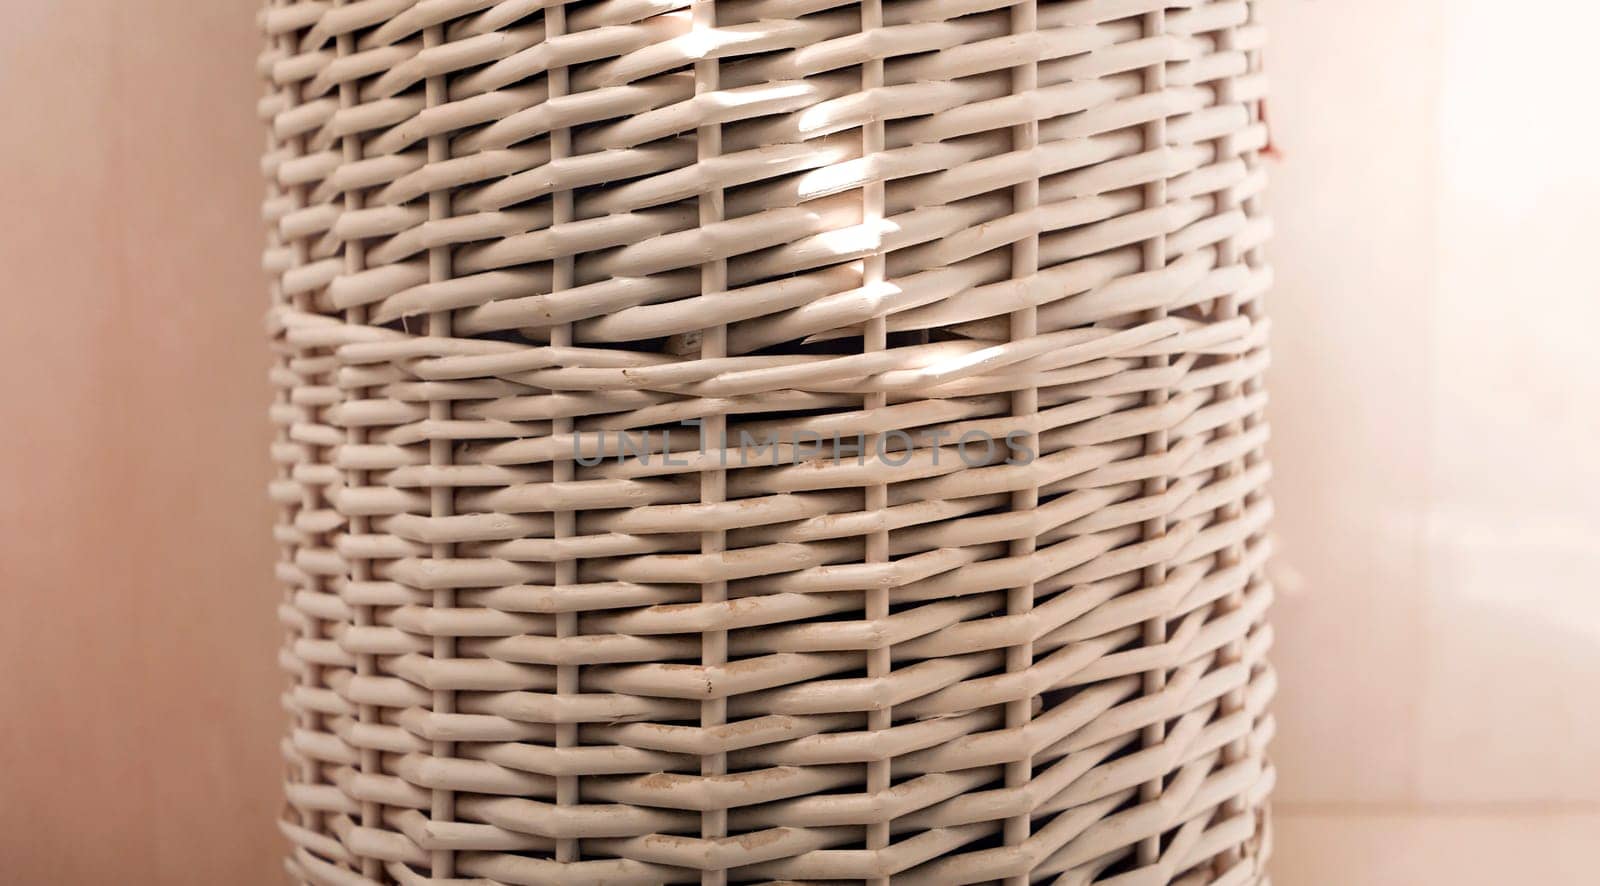 A white laundry basket, stylishly made of wicker wood, stands in the bathroom.